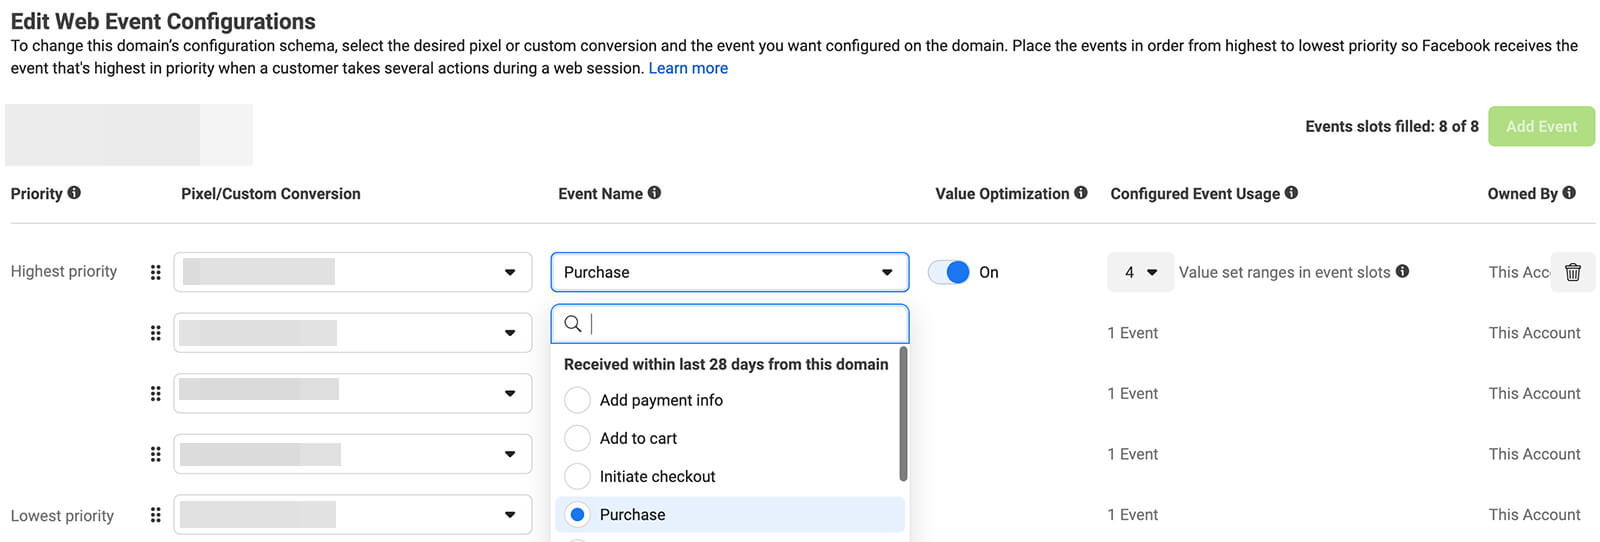 how-to-create-automated-sales-funnel-facebook-meta-events-manager-edit-web-configurations-step-2